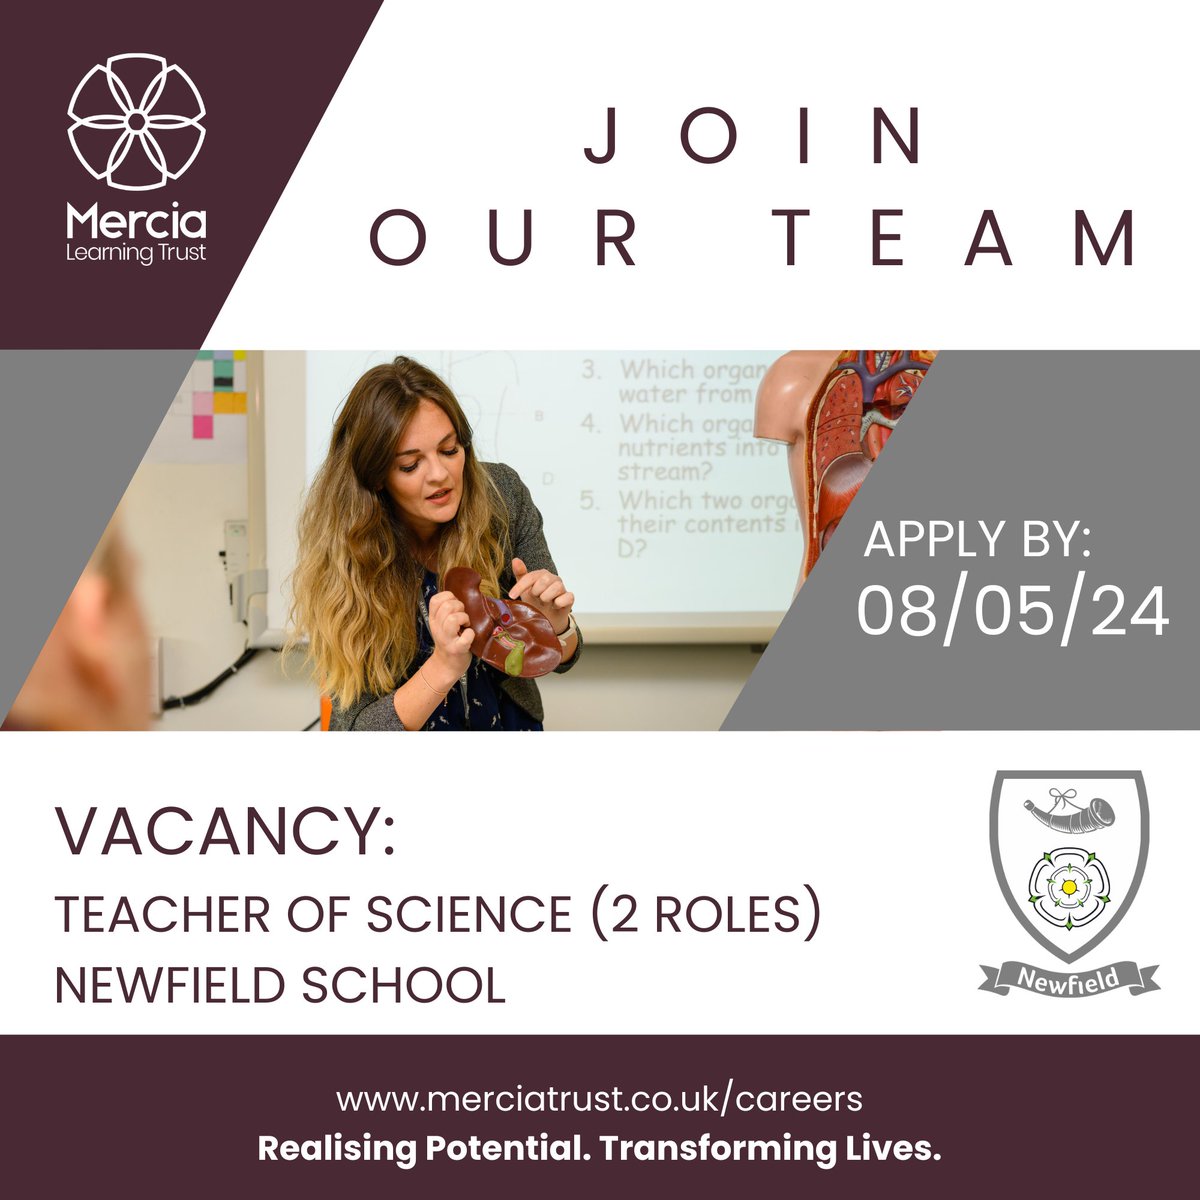 Opportunity for Teachers of Science
Join our dedicated team as a Teacher of Science. We have 2 roles available: 1 permanent (full time), and 1 temporary part-time (0.6).

Find out more:
eteach.com/careers/newfie…

#scienceteacher #sheffield #sheffieldschools #teaching #teachingjobs